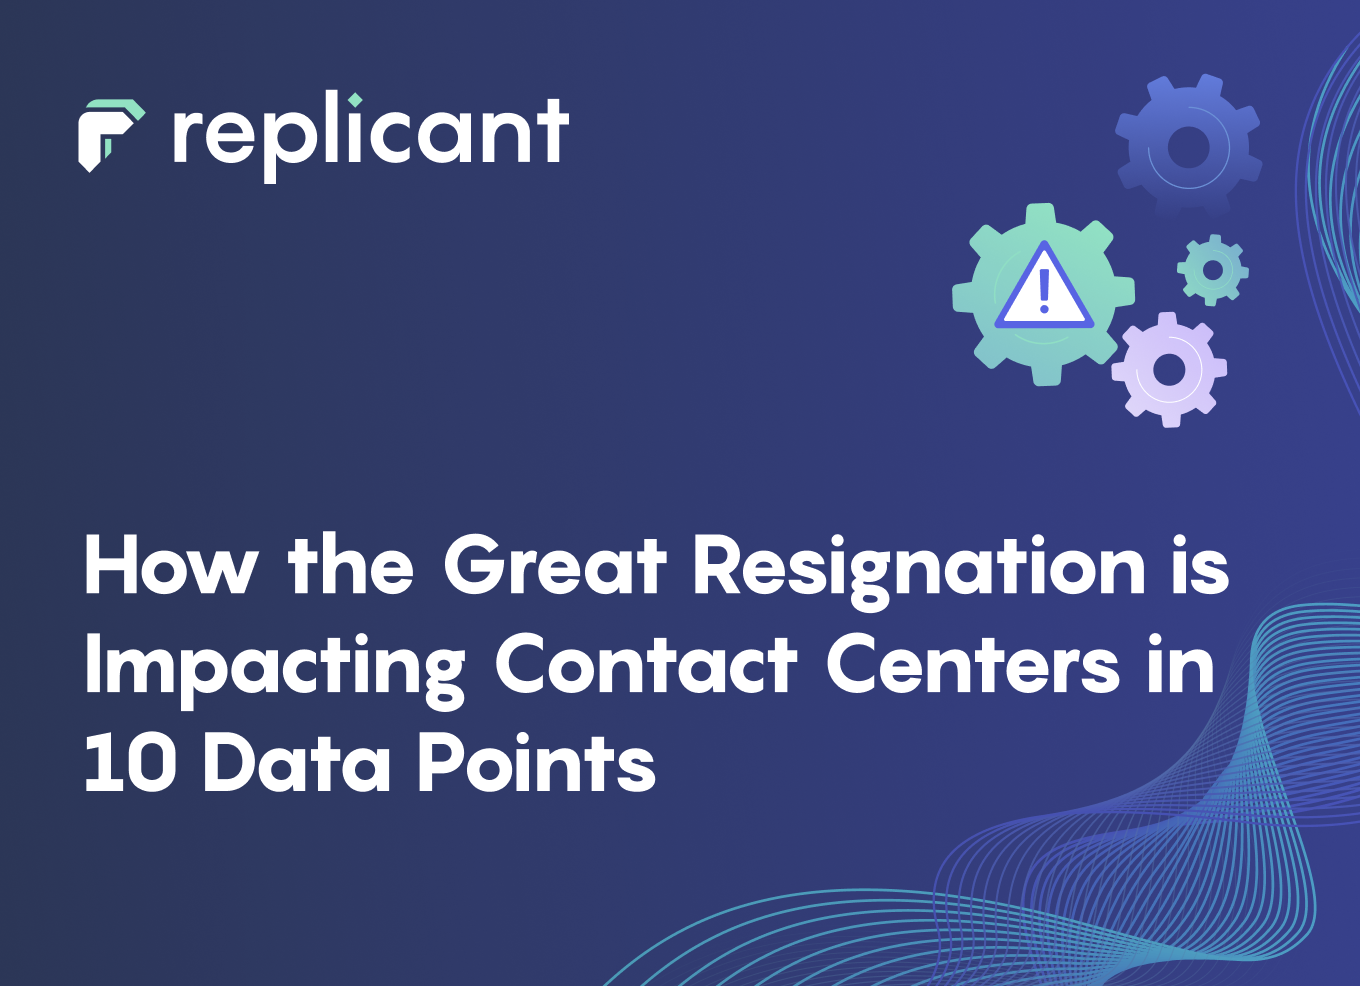 Infographic: How the Great Resignation is Impacting Contact Centers in 10 Data Points